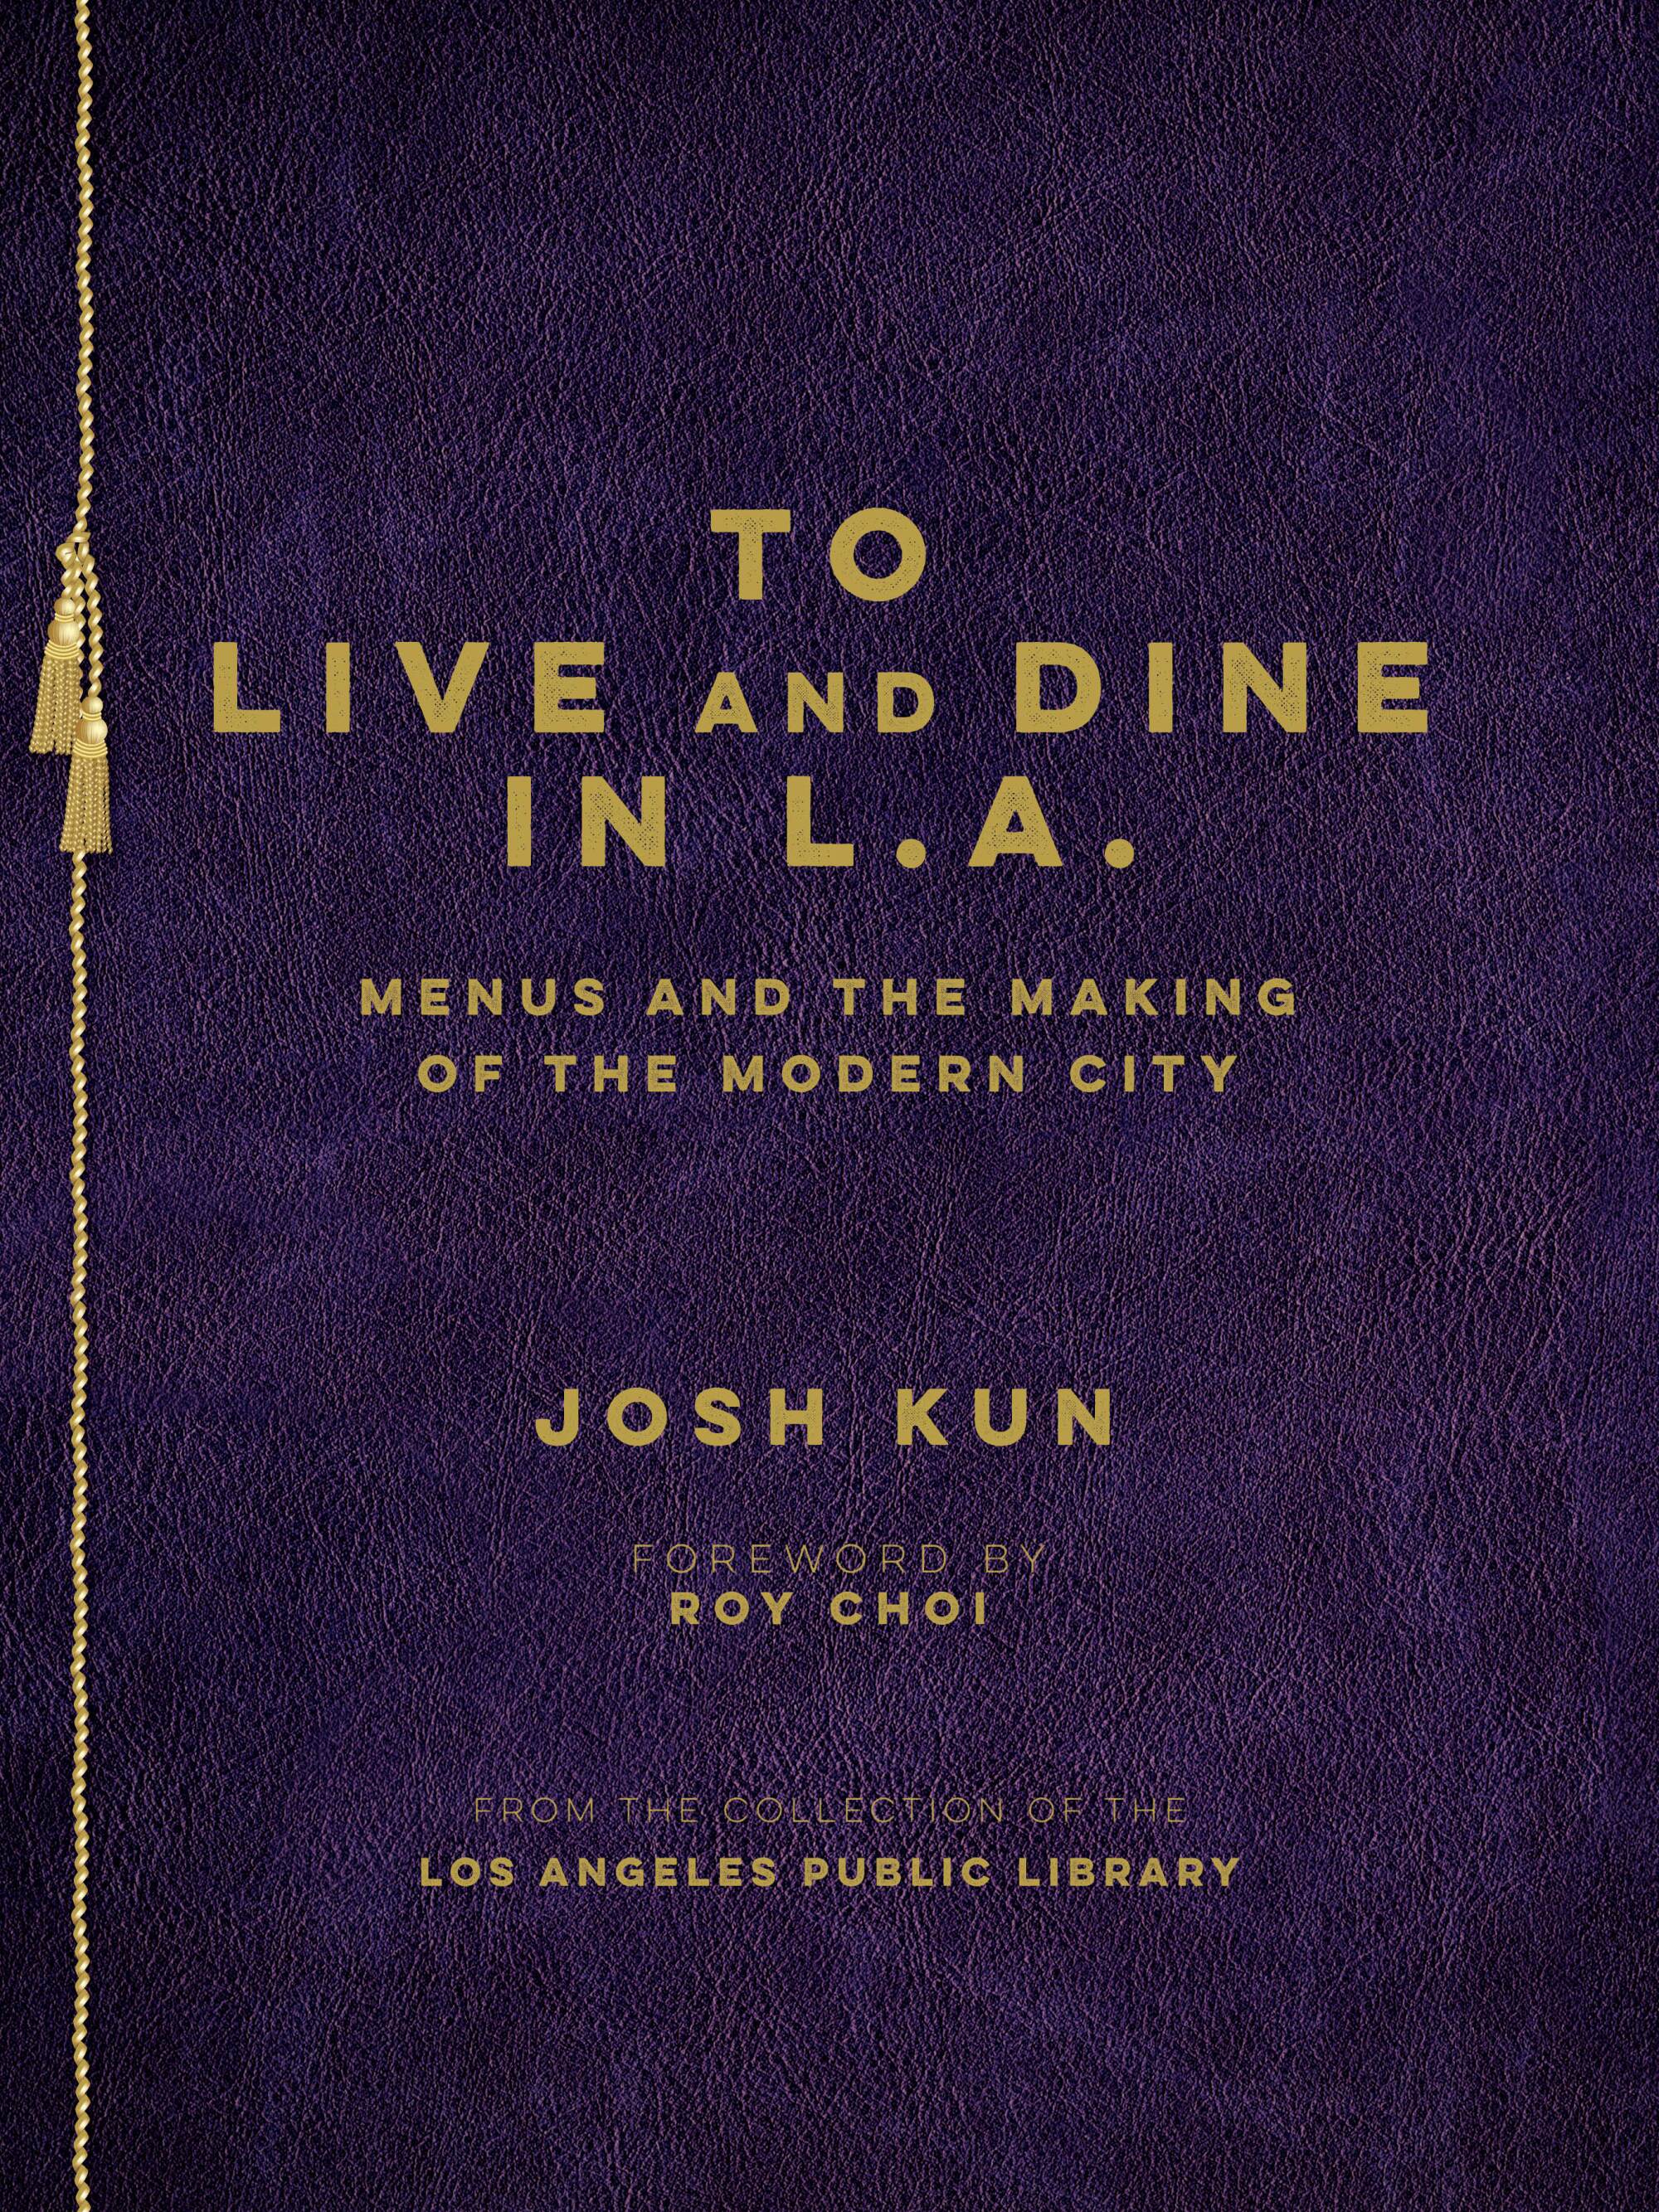 A book cover for "To Live and Dine in L.A.," by Josh Kun